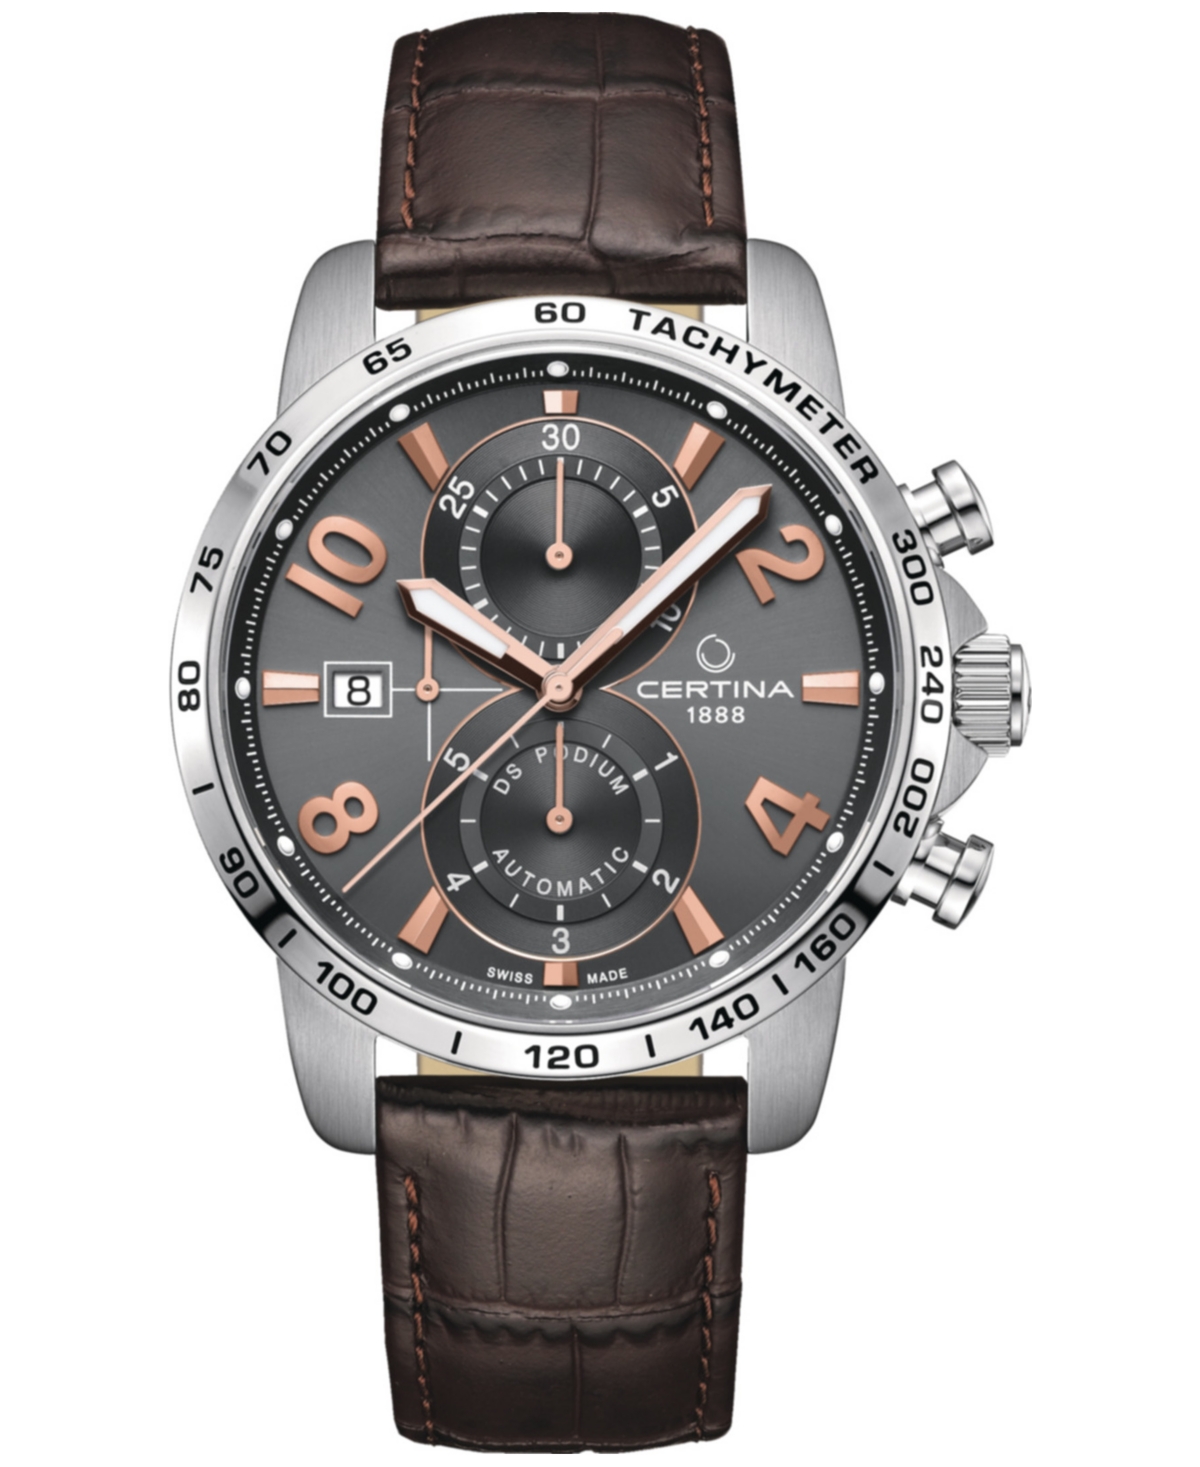 Men's Swiss Automatic Chronograph Ds Podium Brown Leather Strap Watch 44mm - Grey